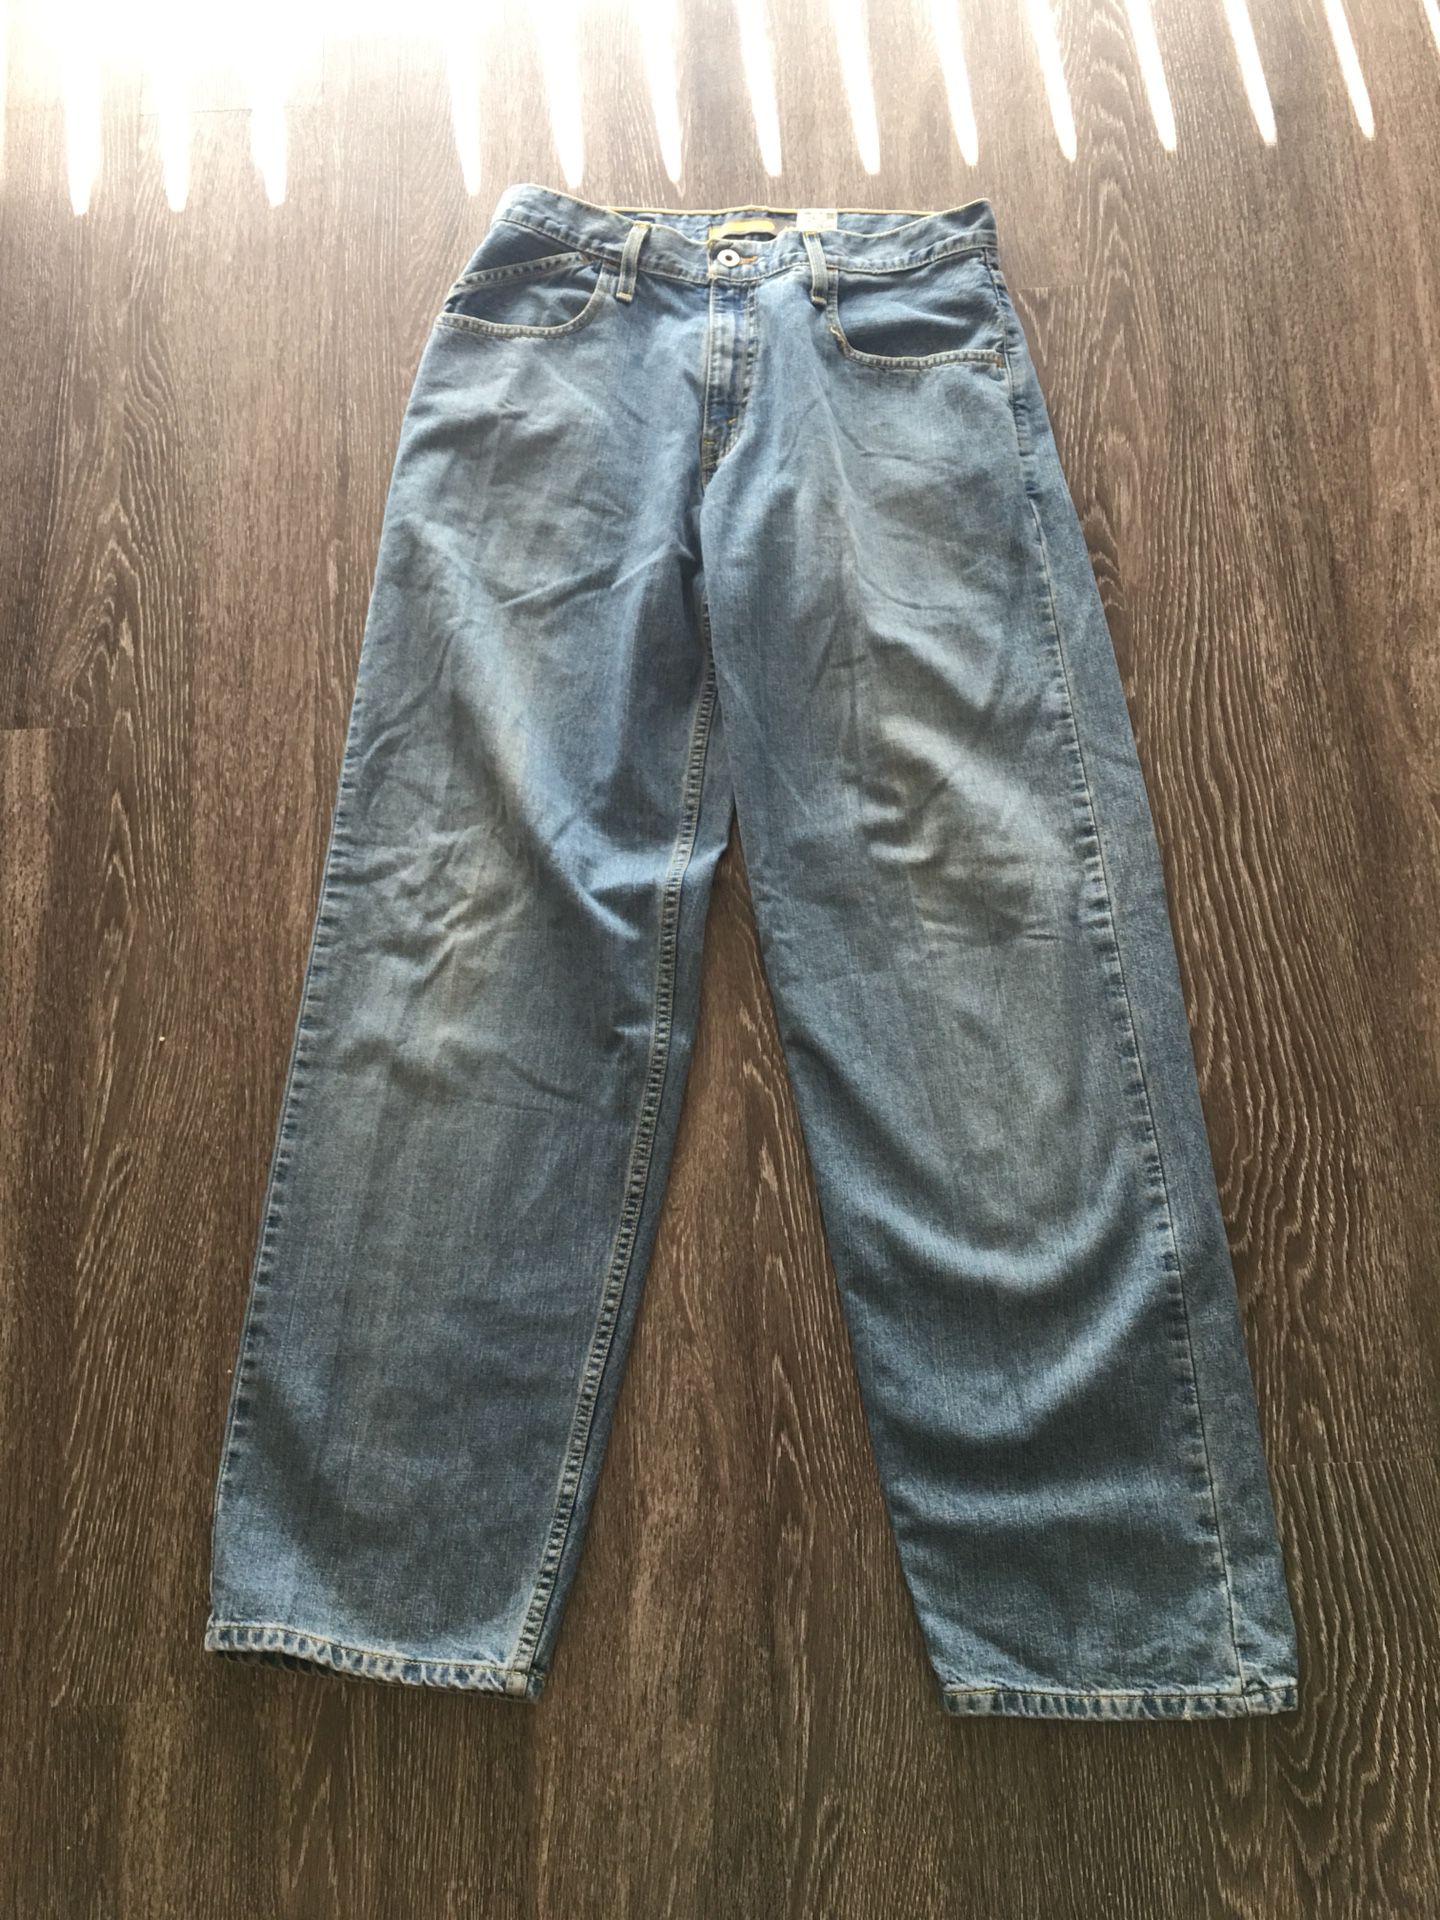 Levi’s Silvertab baggy fit jeans size 31X34